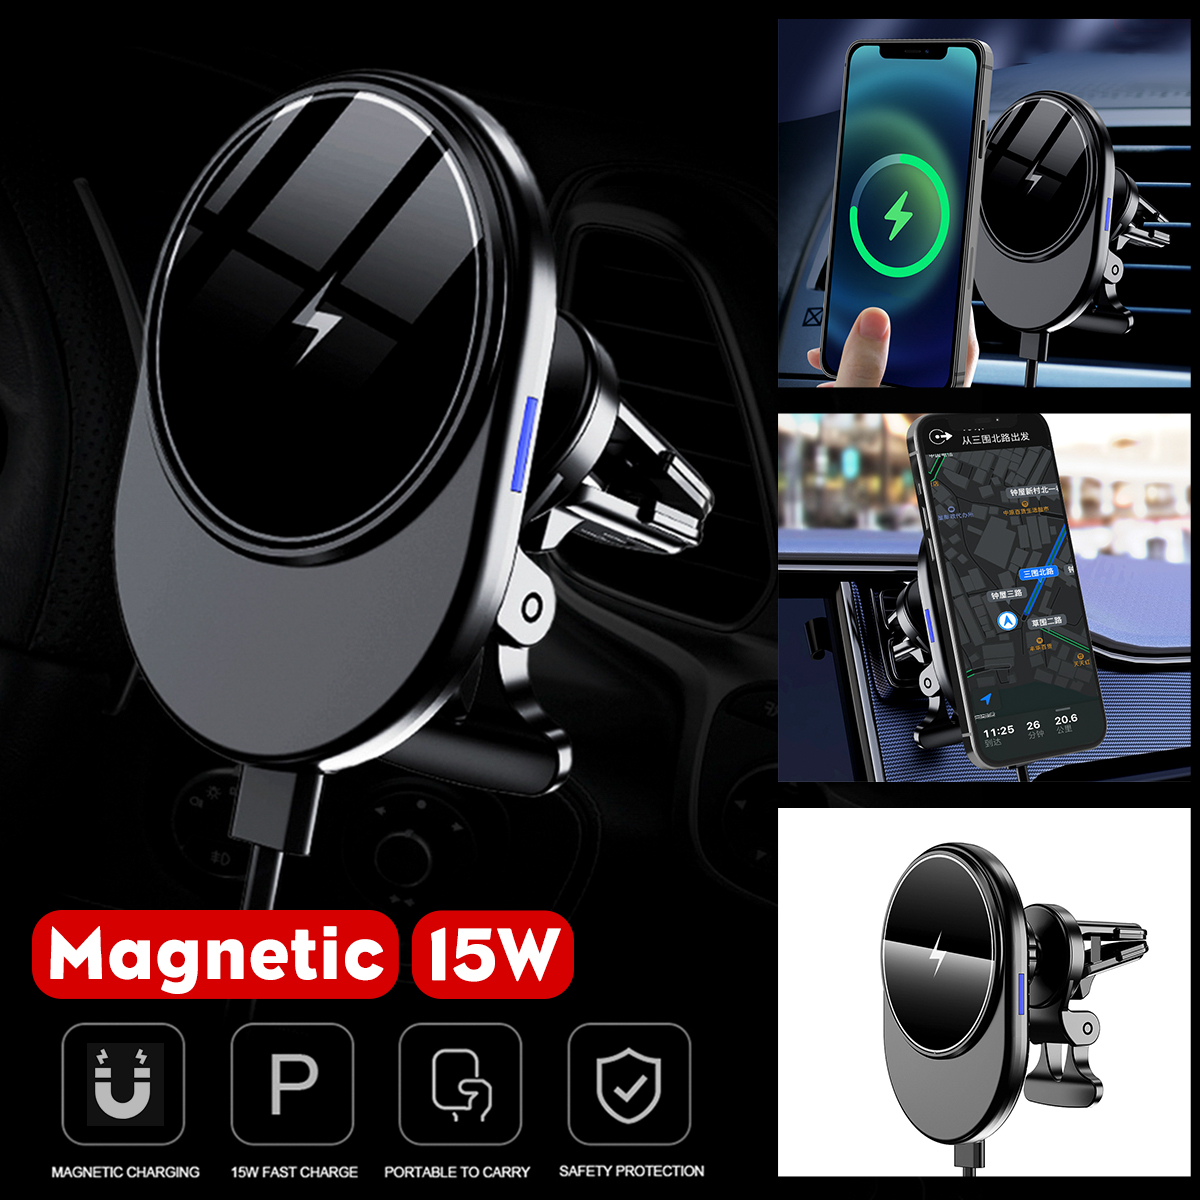 15W-Wireless-Charging-Magnetic-Mobile-Phone-Holder-Car-Air-Outlet-For-iPhone-12-Series-1821806-1